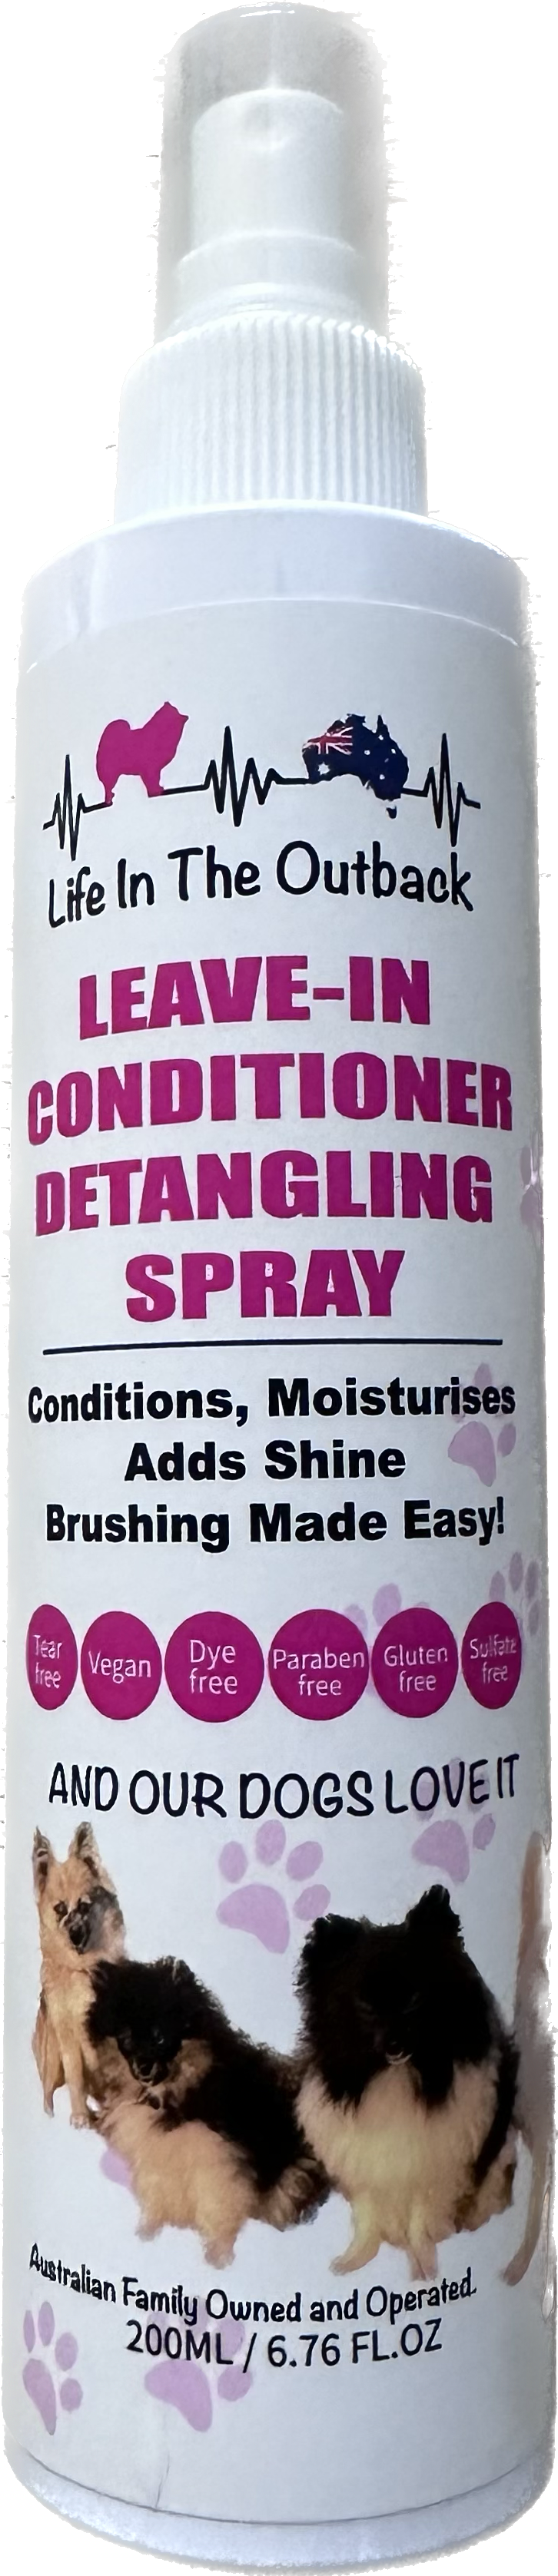 Life in the outback Leave-in conditioner detangling spray